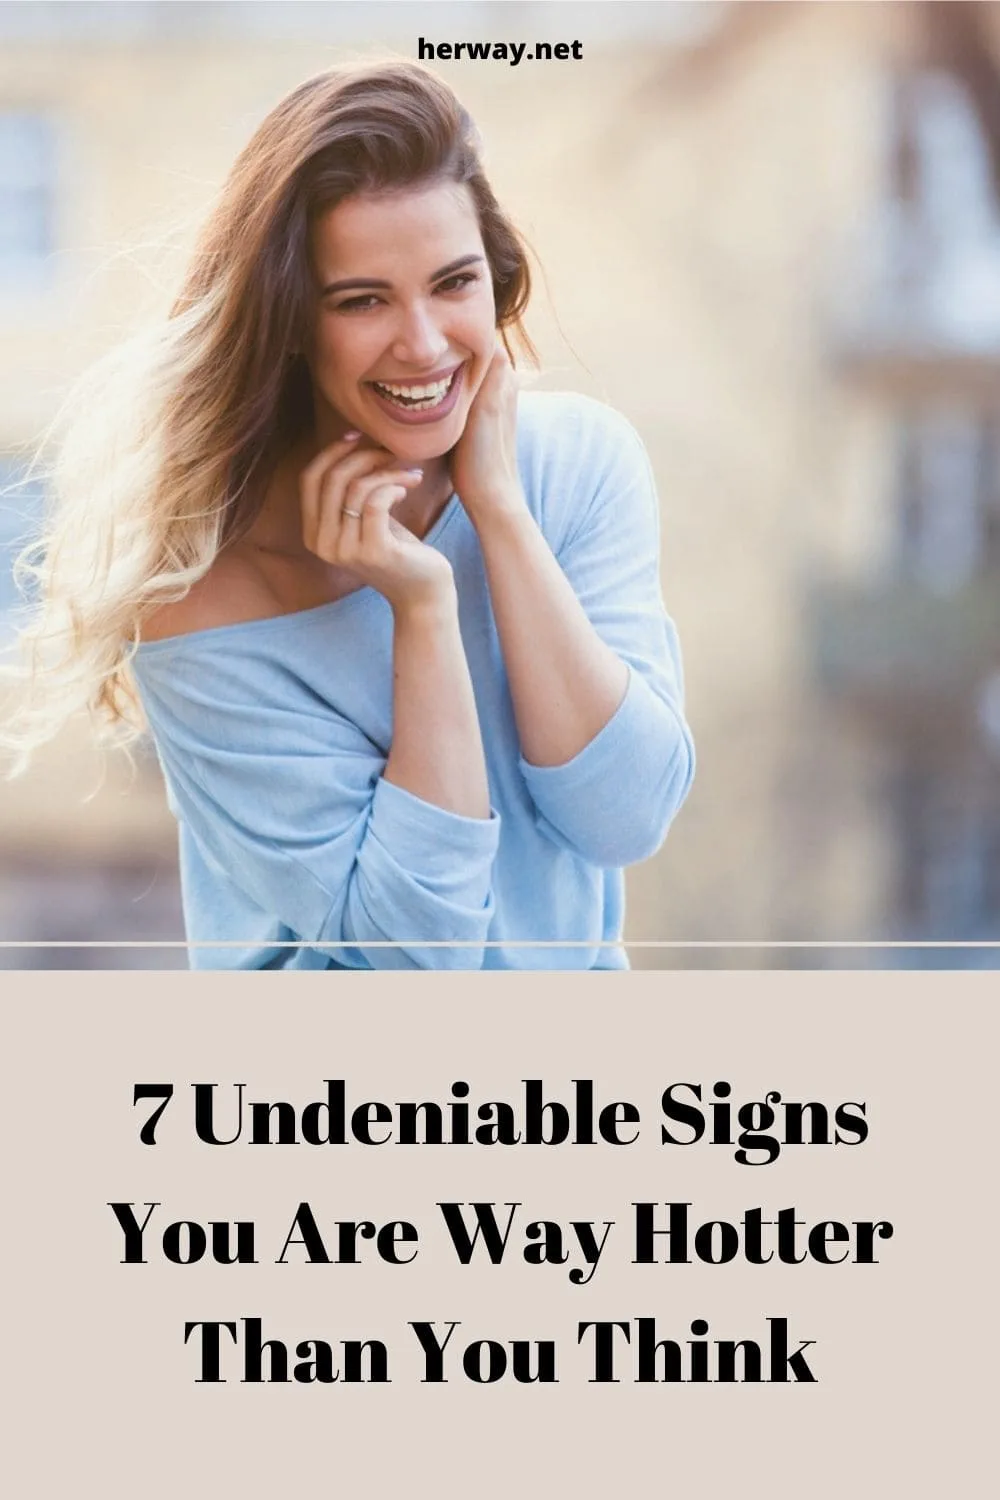 7 Undeniable Signs You Are Way Hotter Than You Think